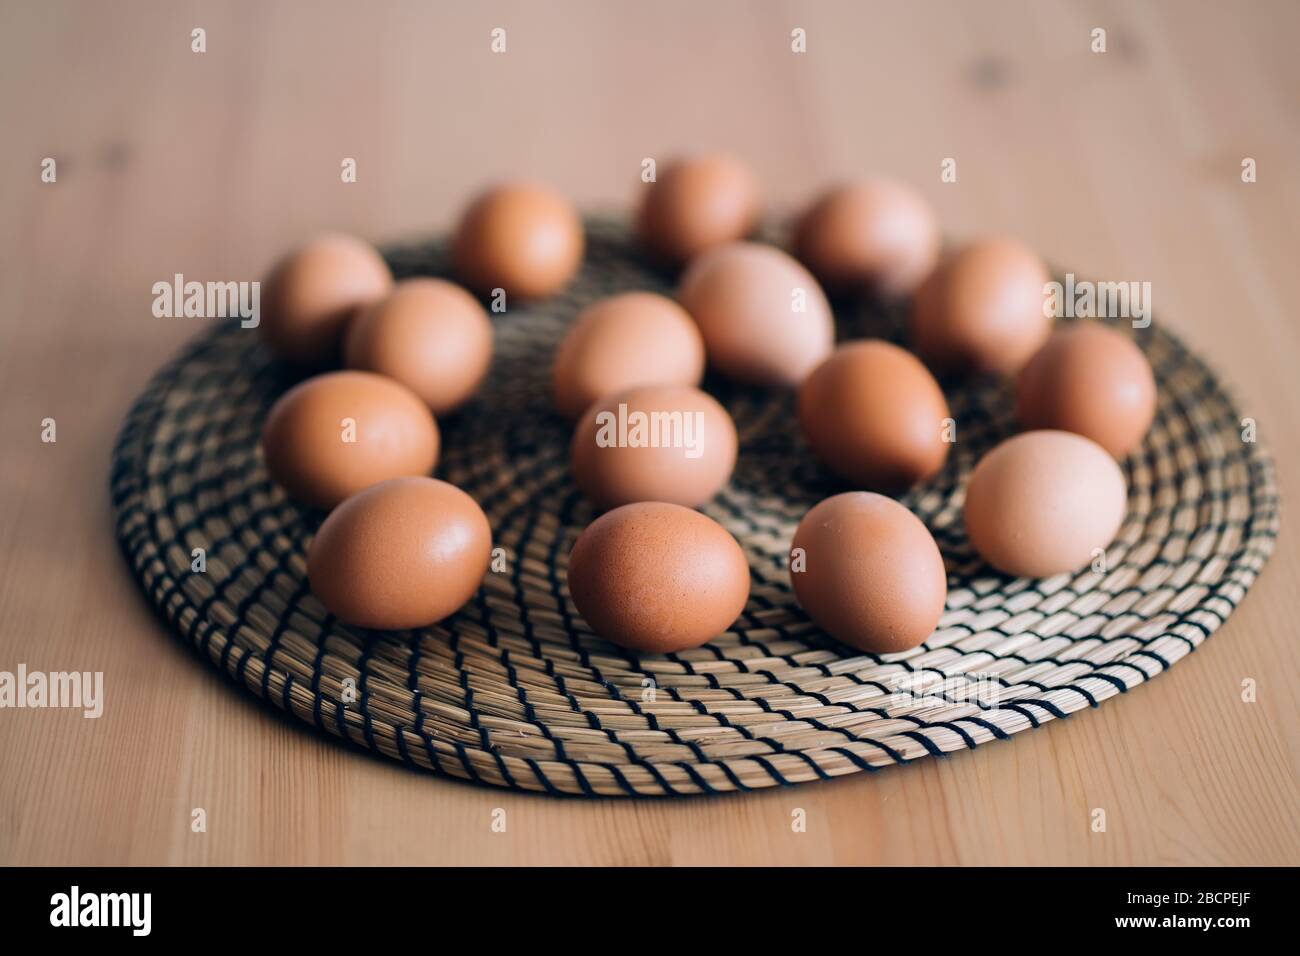 Brown chicken eggs on round wicker kitchen stand on rustic wooden table. Selective focus. Organic food, healthy eating, dieting, protein, farm product Stock Photo